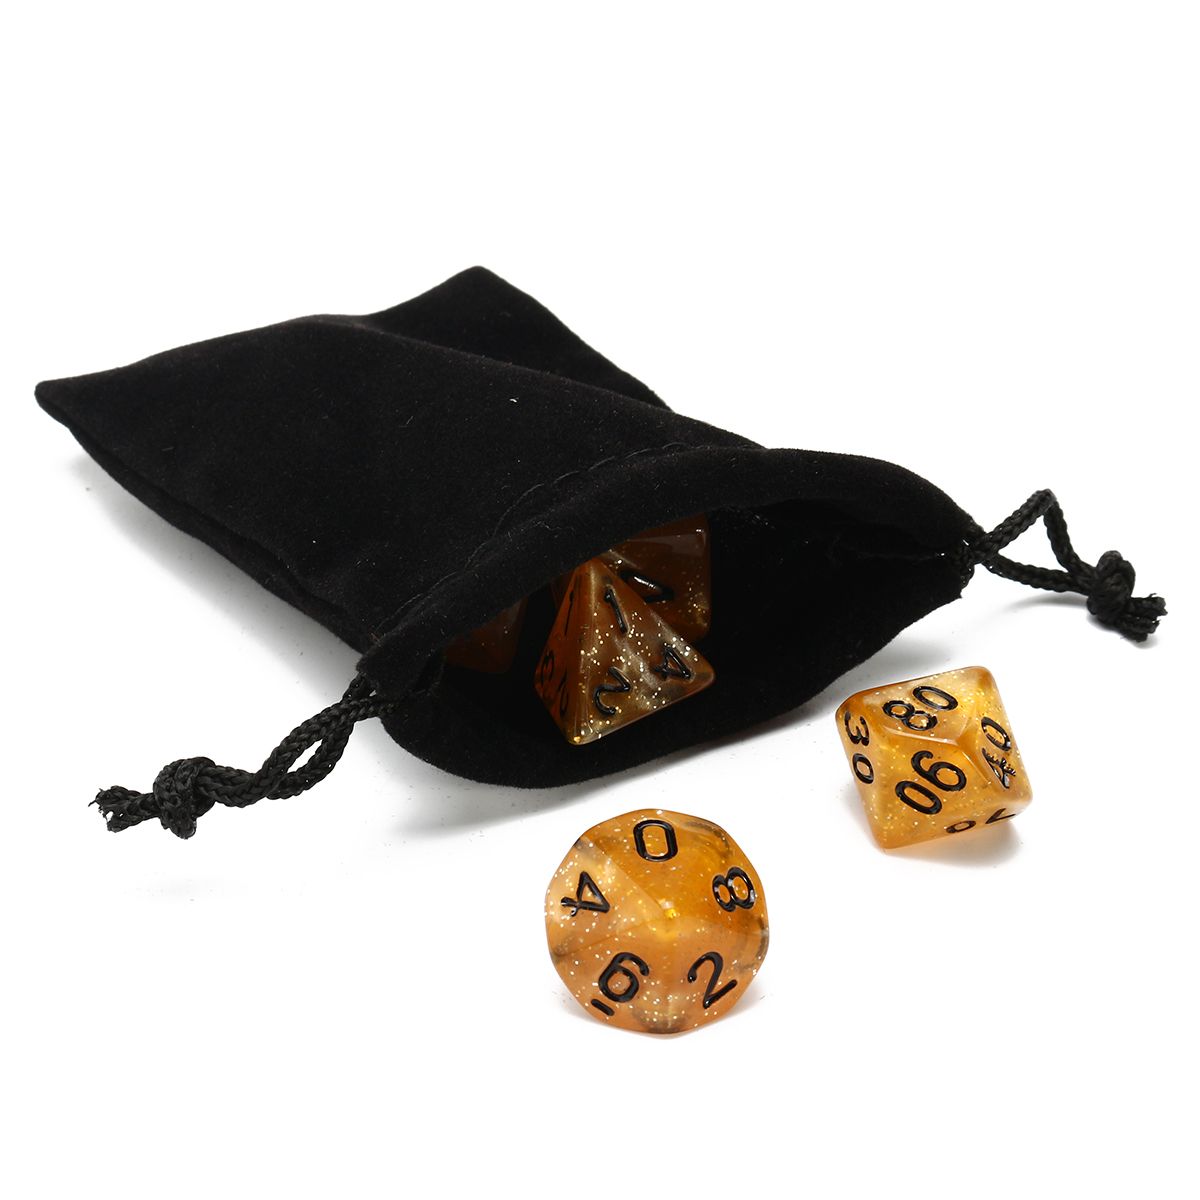 7-Piece-Polyhedral-Dice-Set-Multisided-Dice-With-Dice-Bag-RPG-Role-Playing-Games-Dices-Gadget-1267393